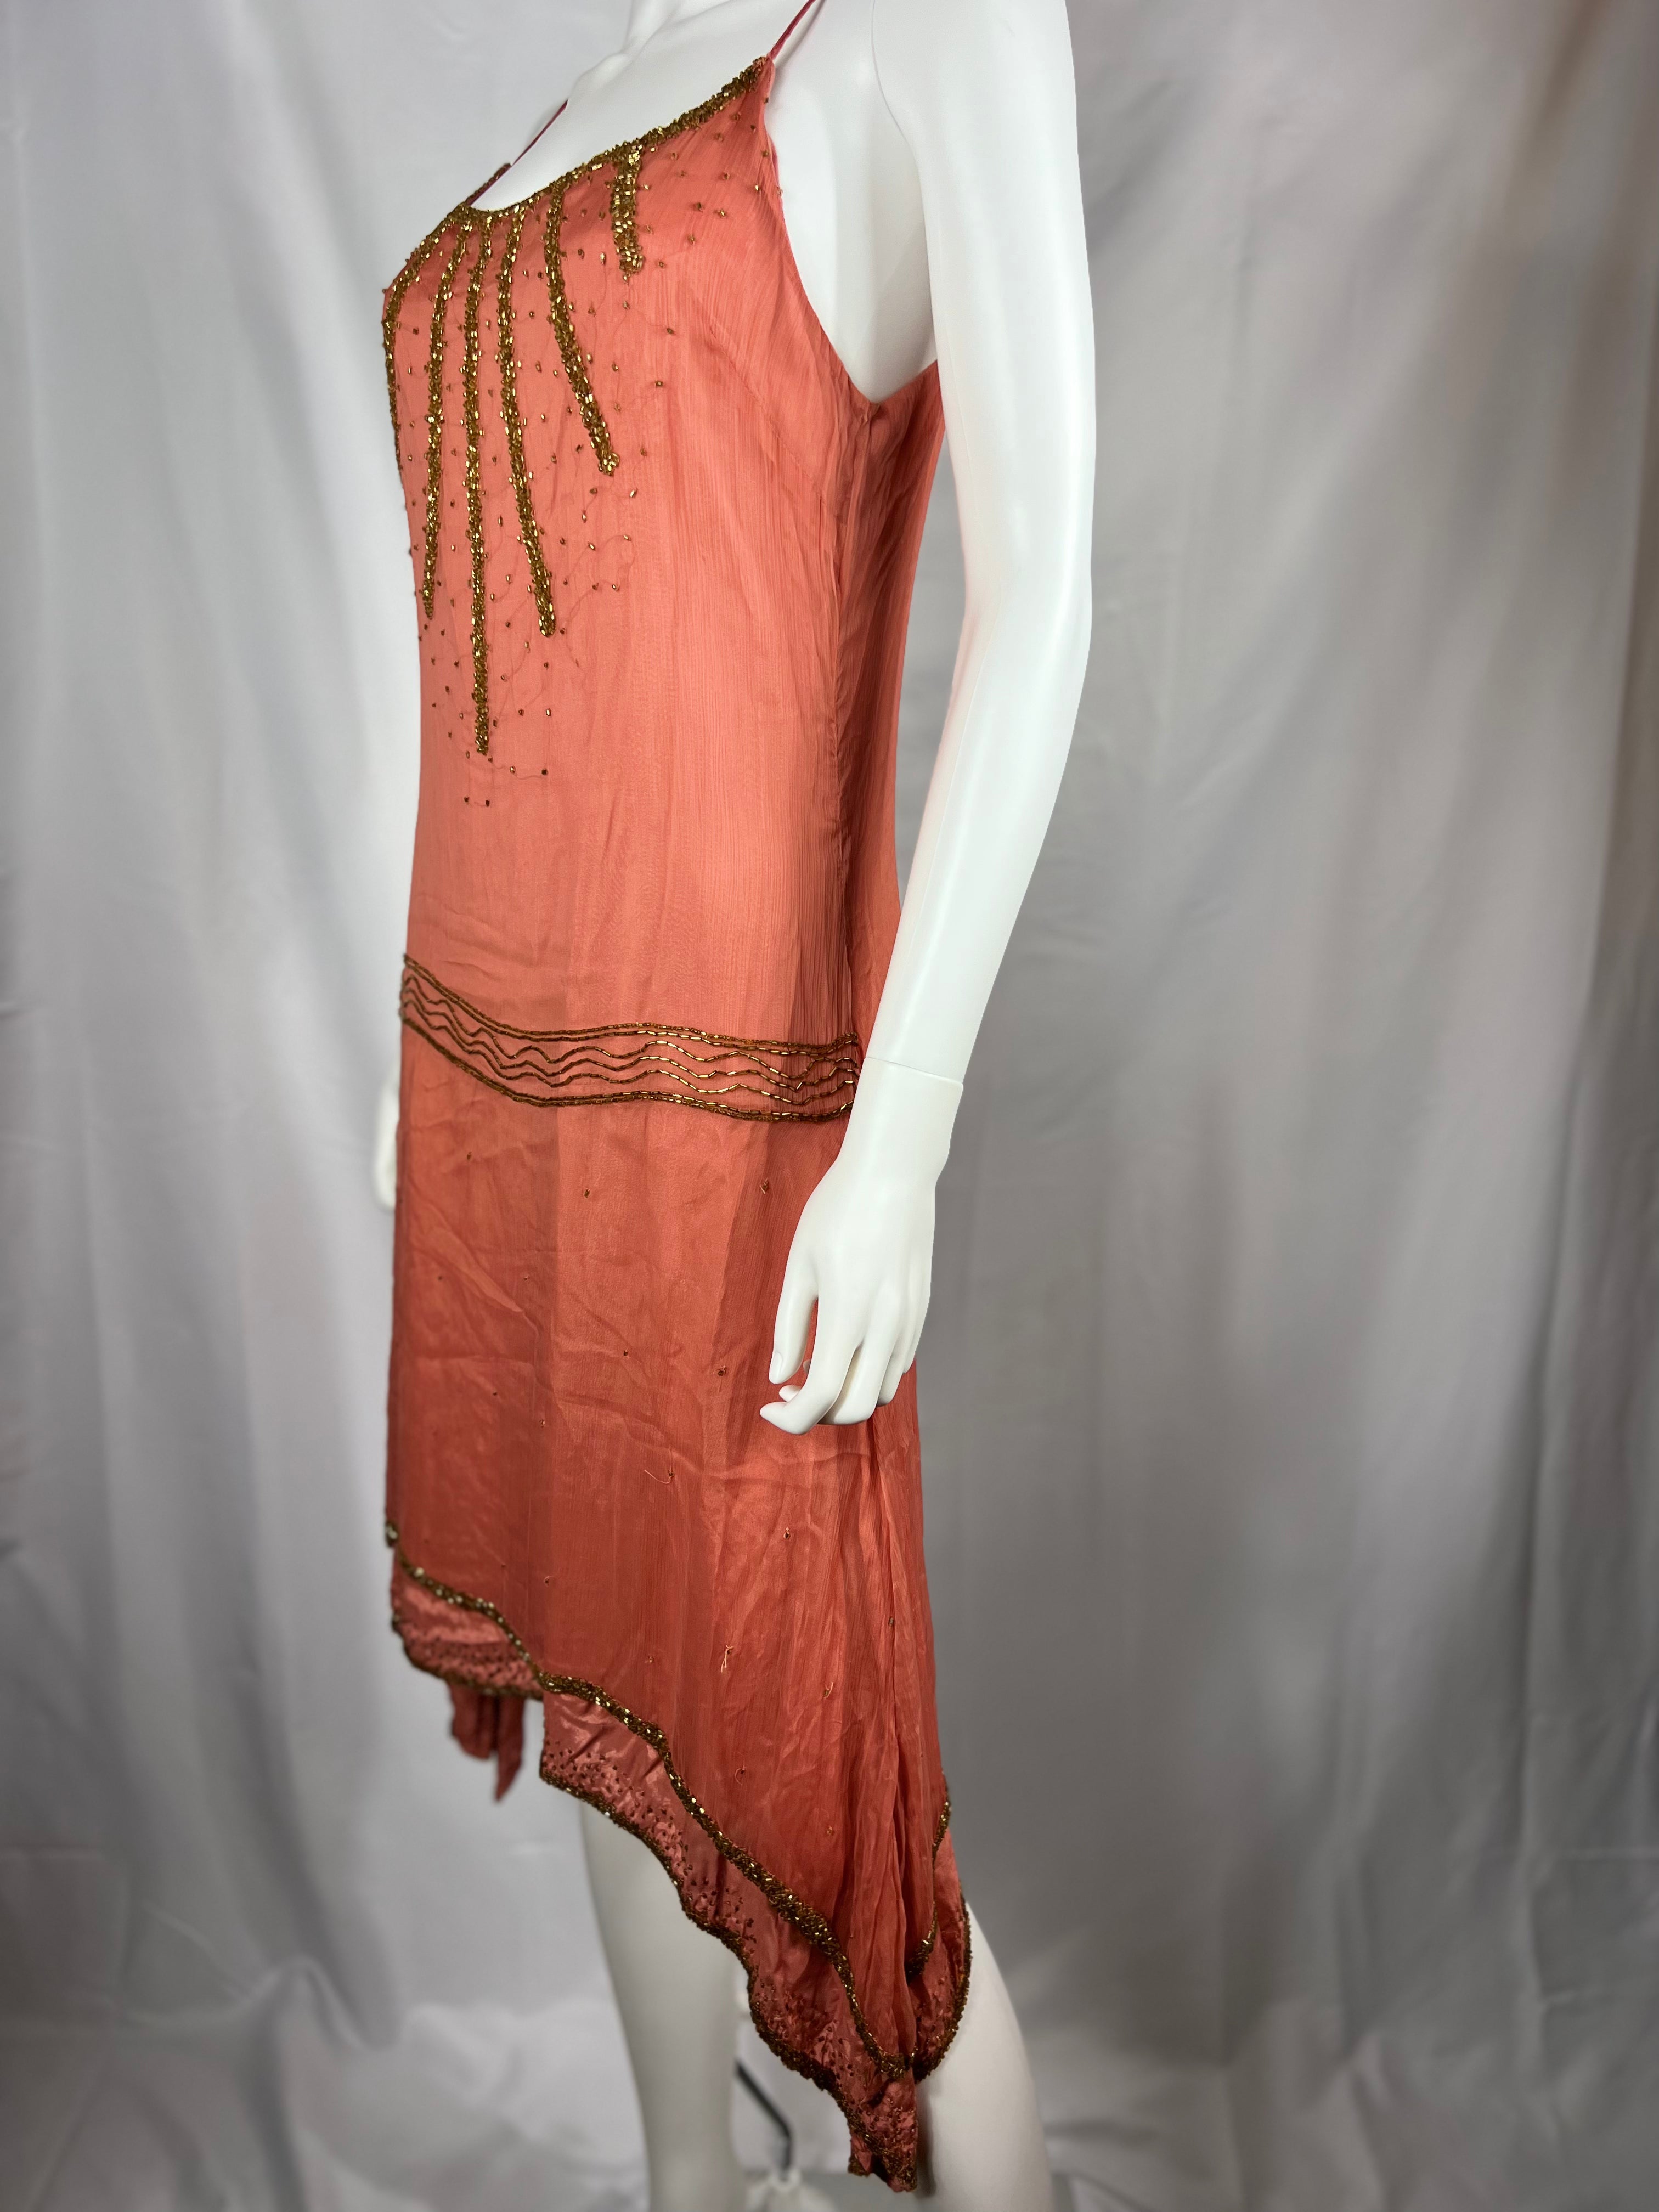 Pink Flapper 20's style dress